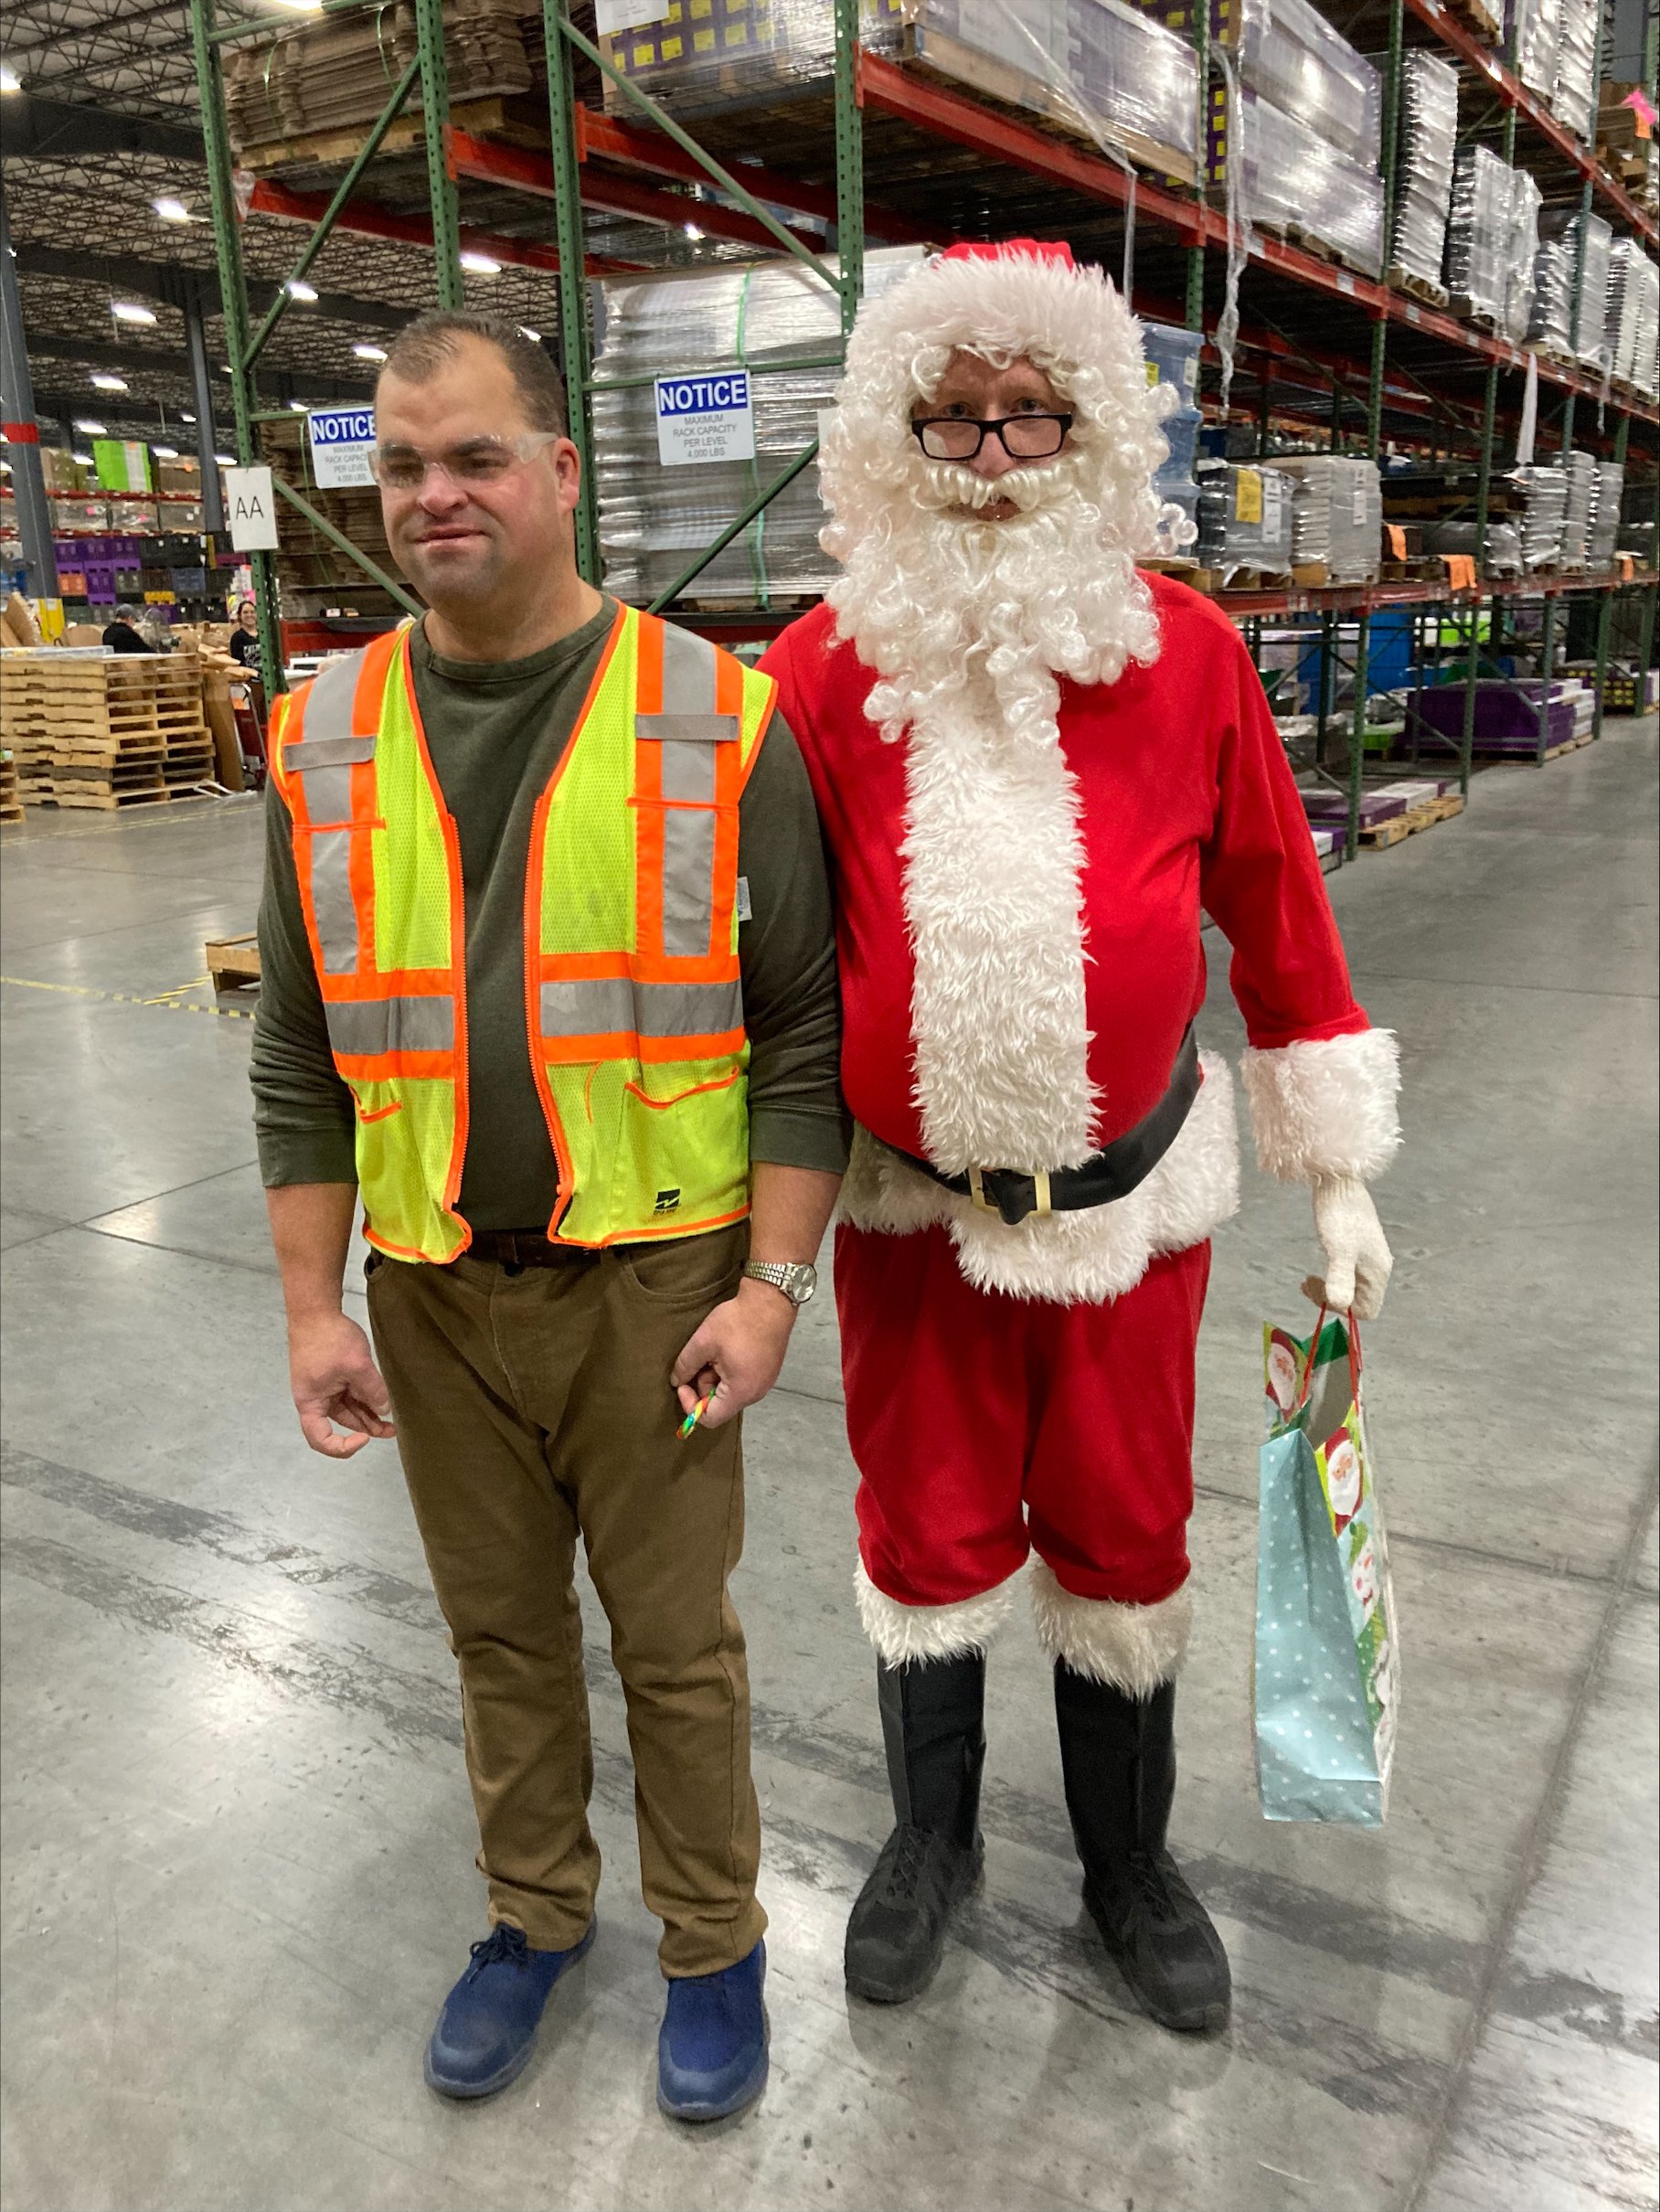 NW Works service recipient, Steve, stands with Santa in Trex's warehouse